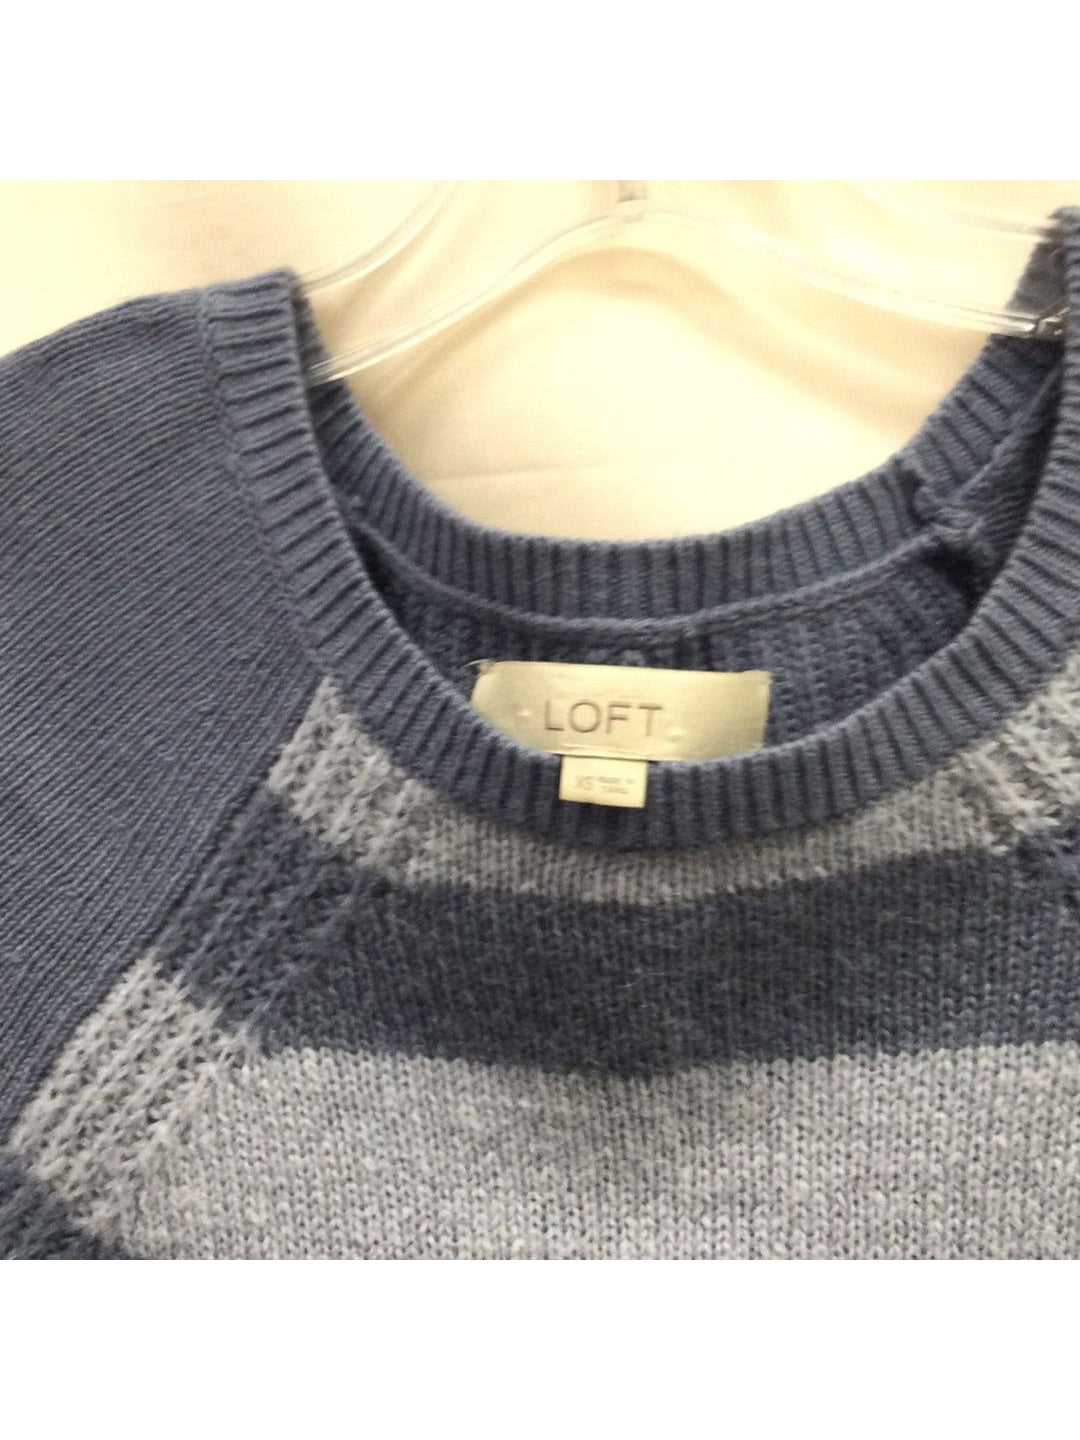 Ann Taylor Loft Girl's Sweater - The Kennedy Collective Thrift - 